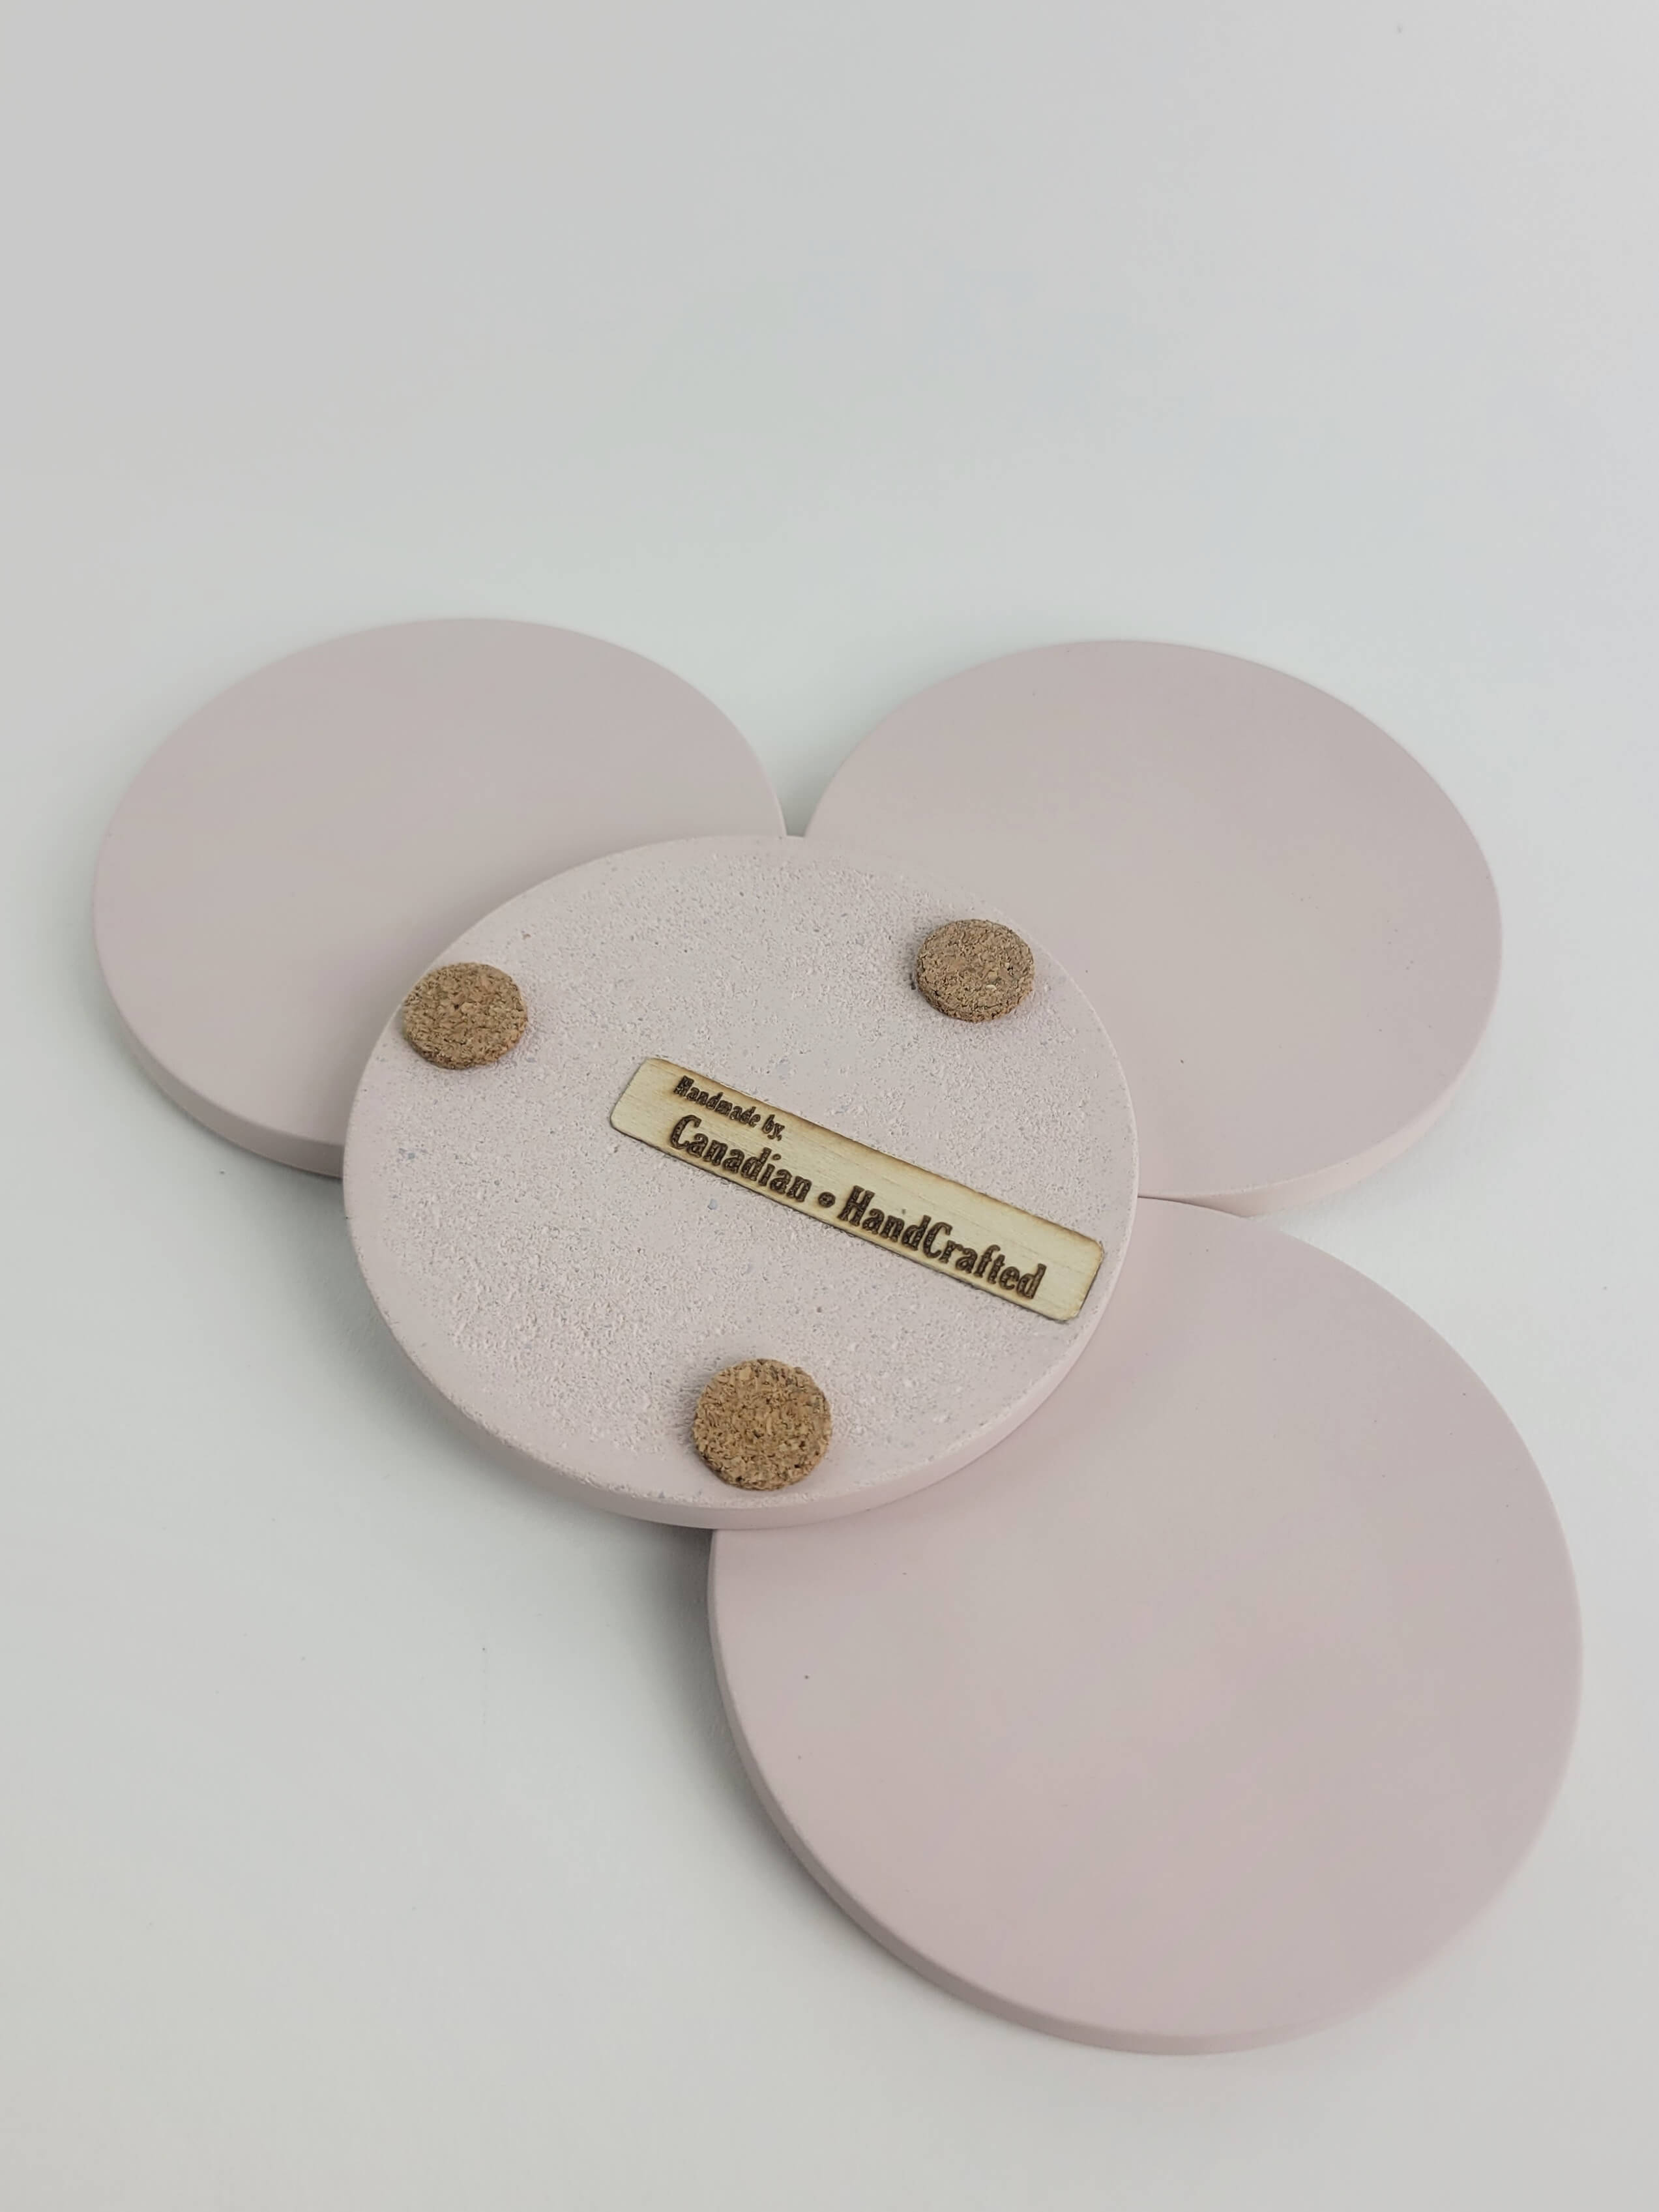 Set of 4 pastel pink concrete coasters, one flipped to reveal the underside featuring 3 cork bumpers and an engraved wooden veneer with the text 'Handmade by Canadian HandCrafted'.